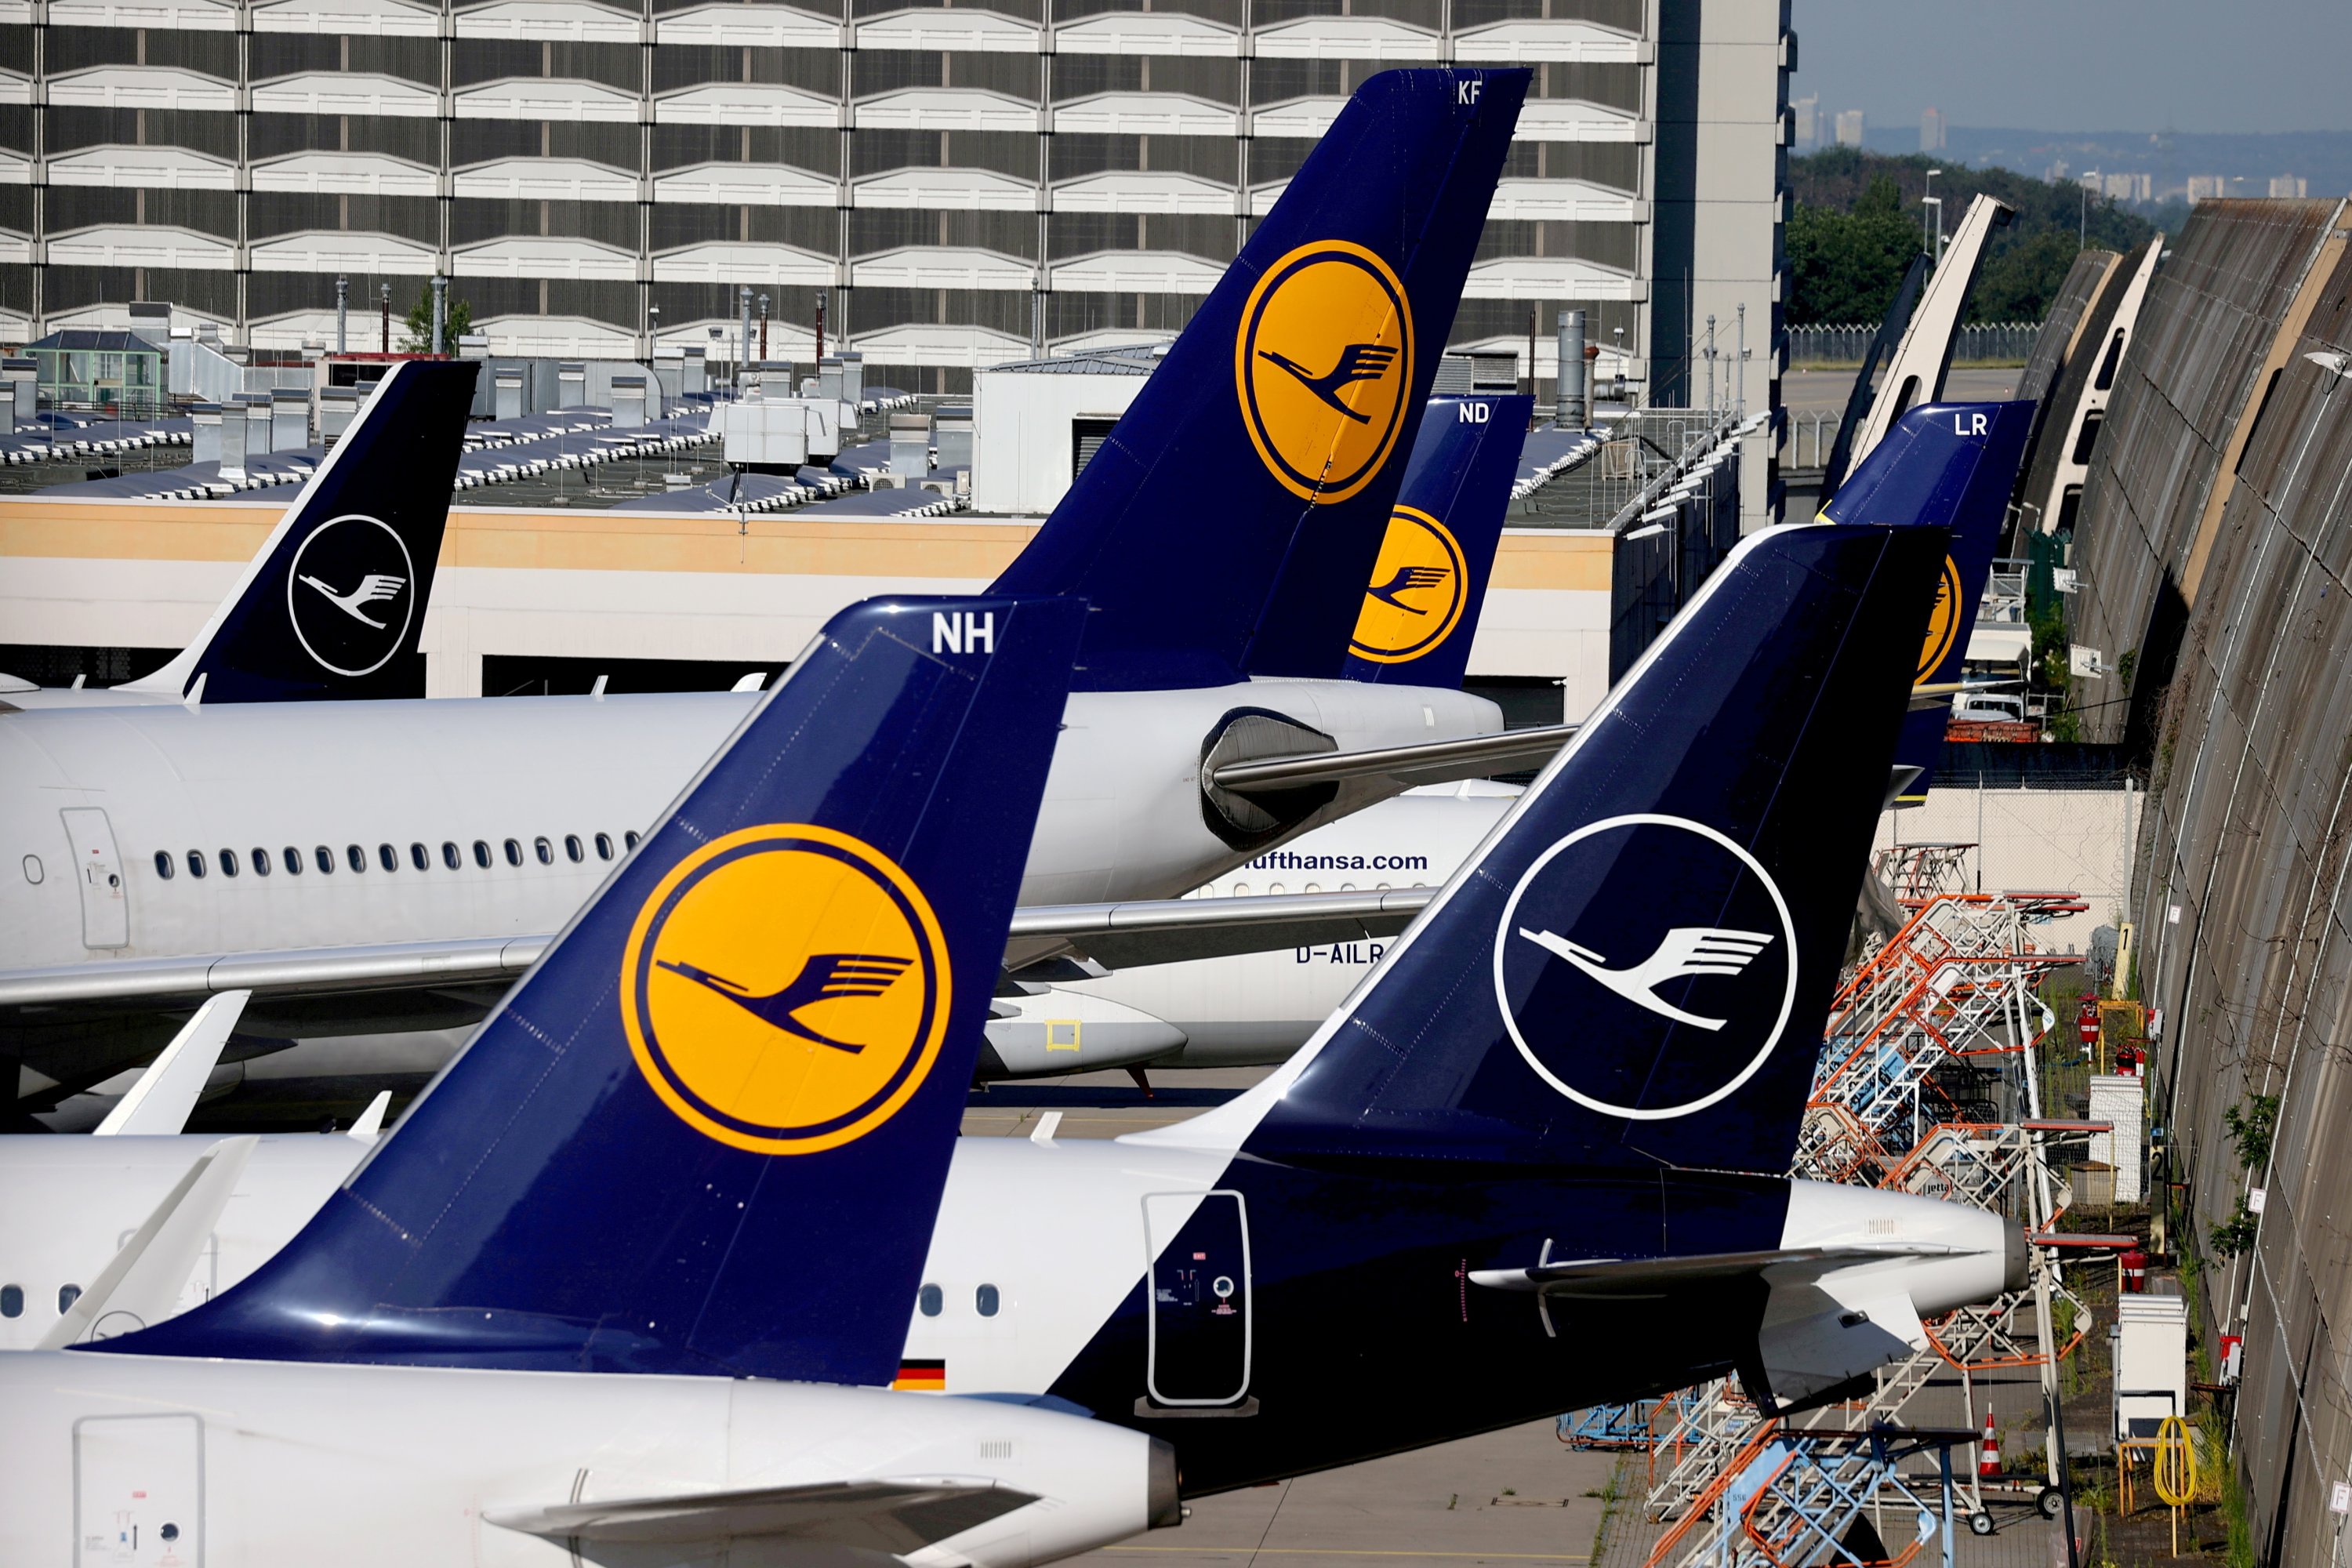 Is Lufthansa owned by Germany?